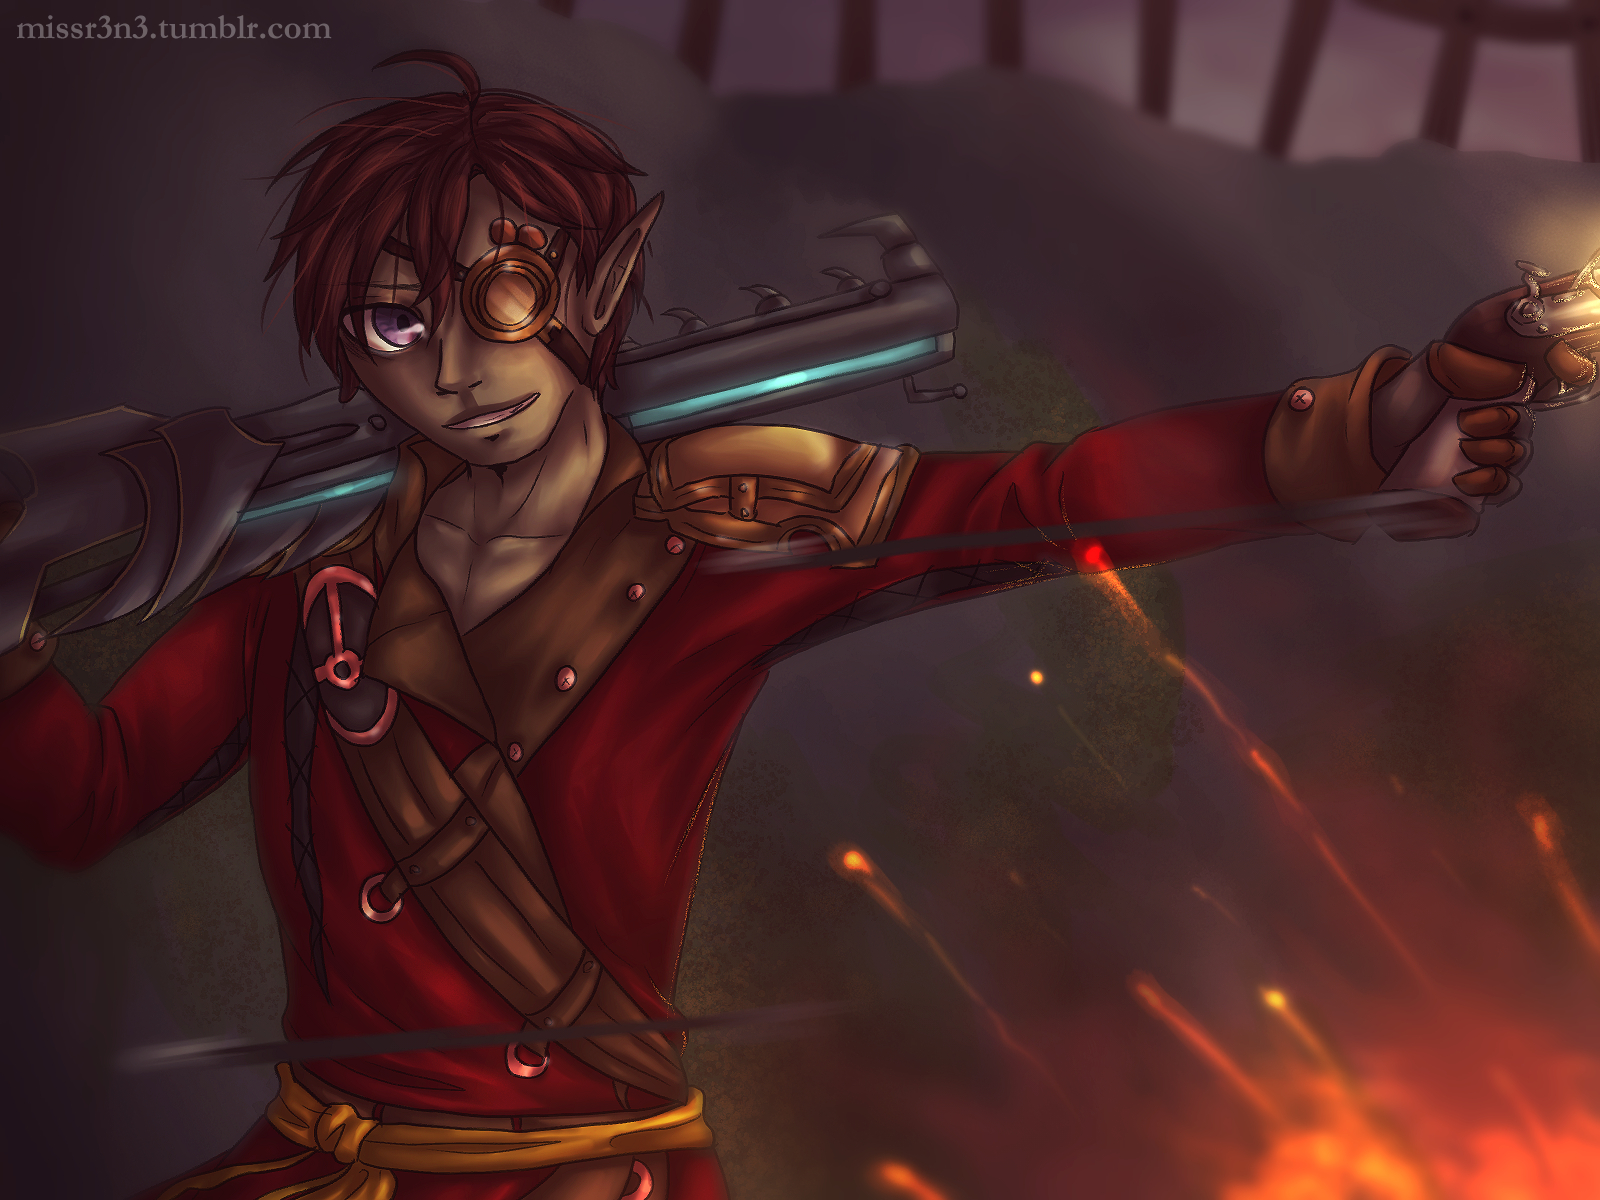 a drawing of my guild wars 2 sylvari commander OC, hazel aldern, drawn with the beta sylvari's design. he's shooting his pistol to the right of the frame and is carrying his pact shotgun over his shoulder. an explosion is occuring in front of him